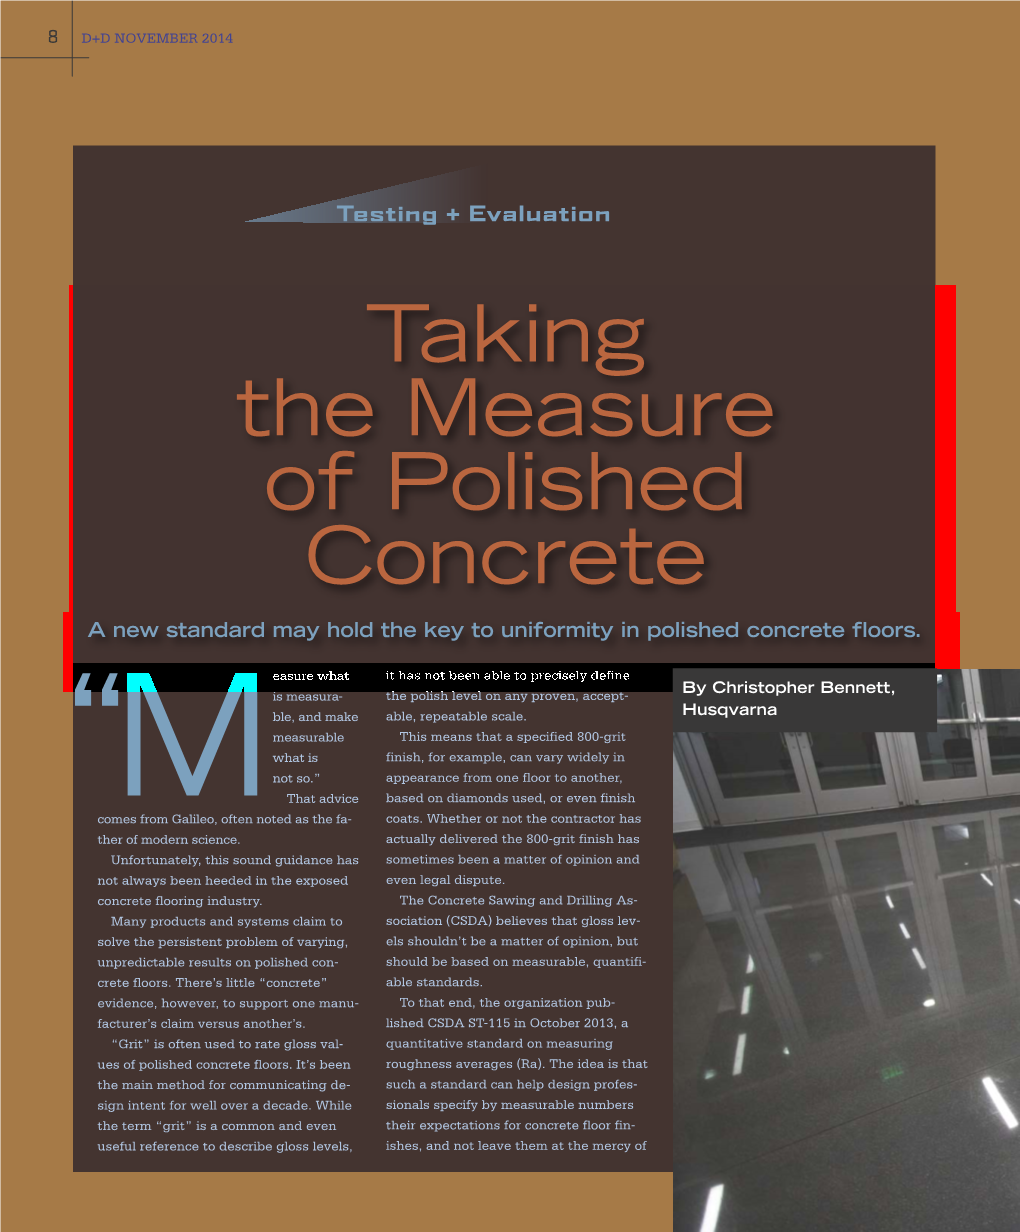 Taking the Measure of Polished Concrete